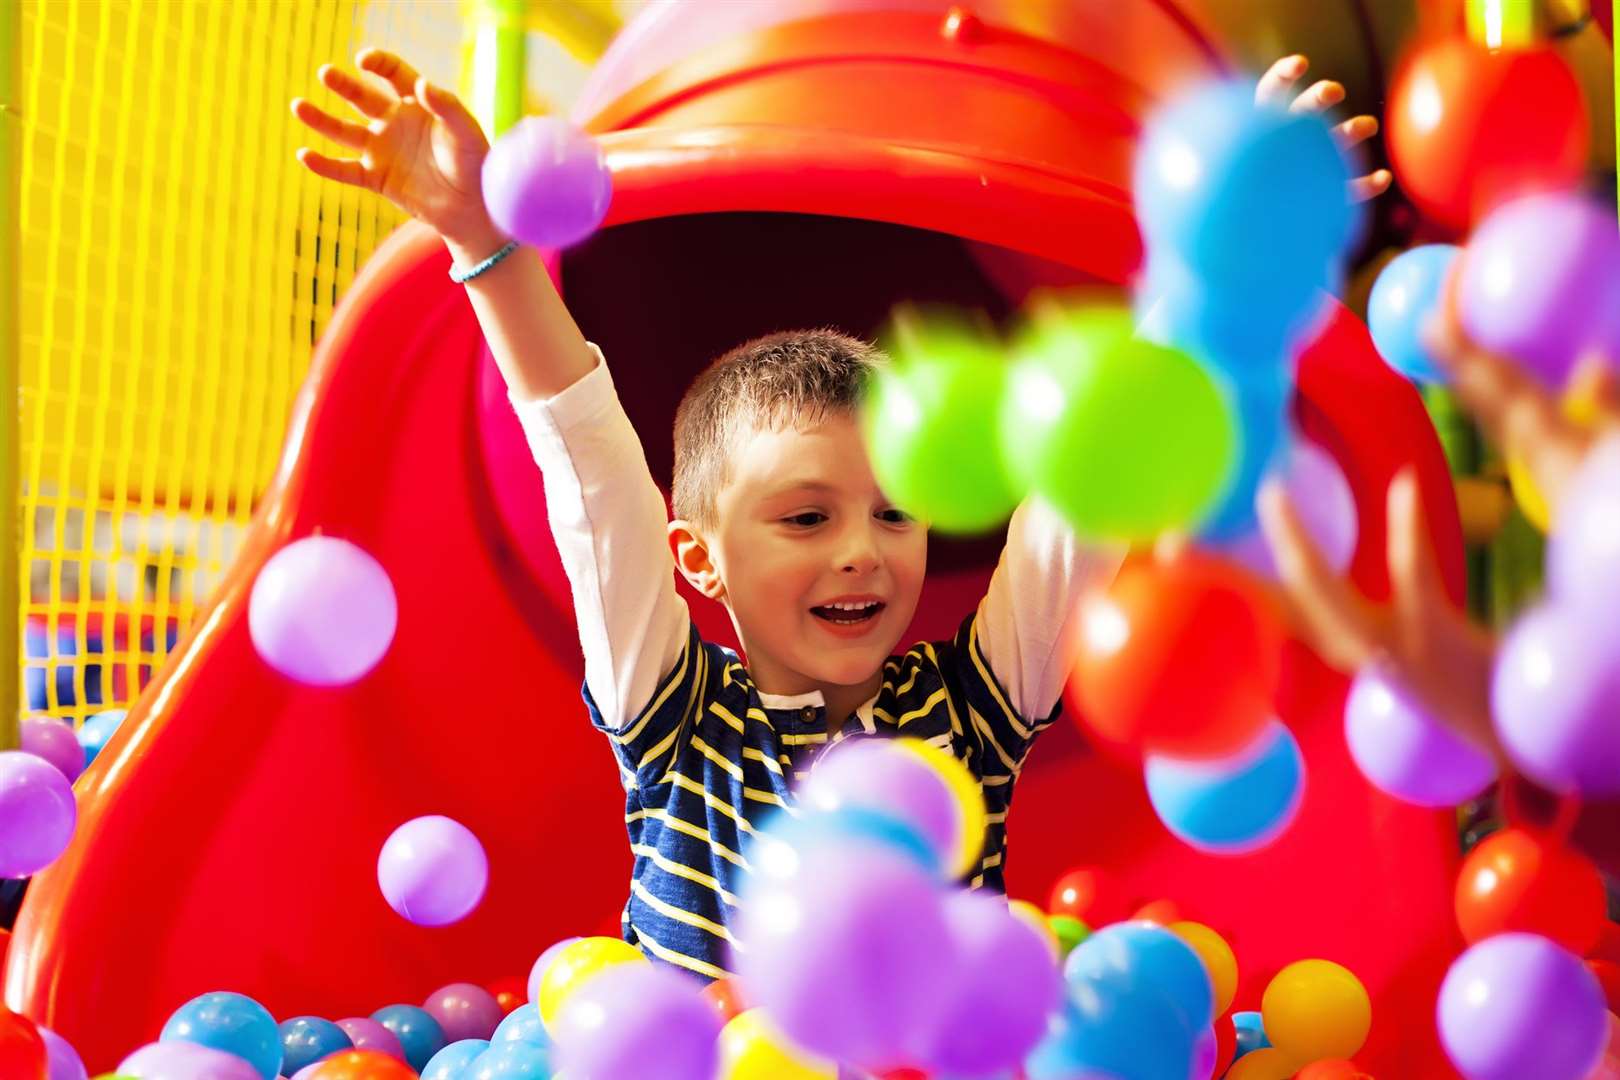 Soft play is a popular indoor activity